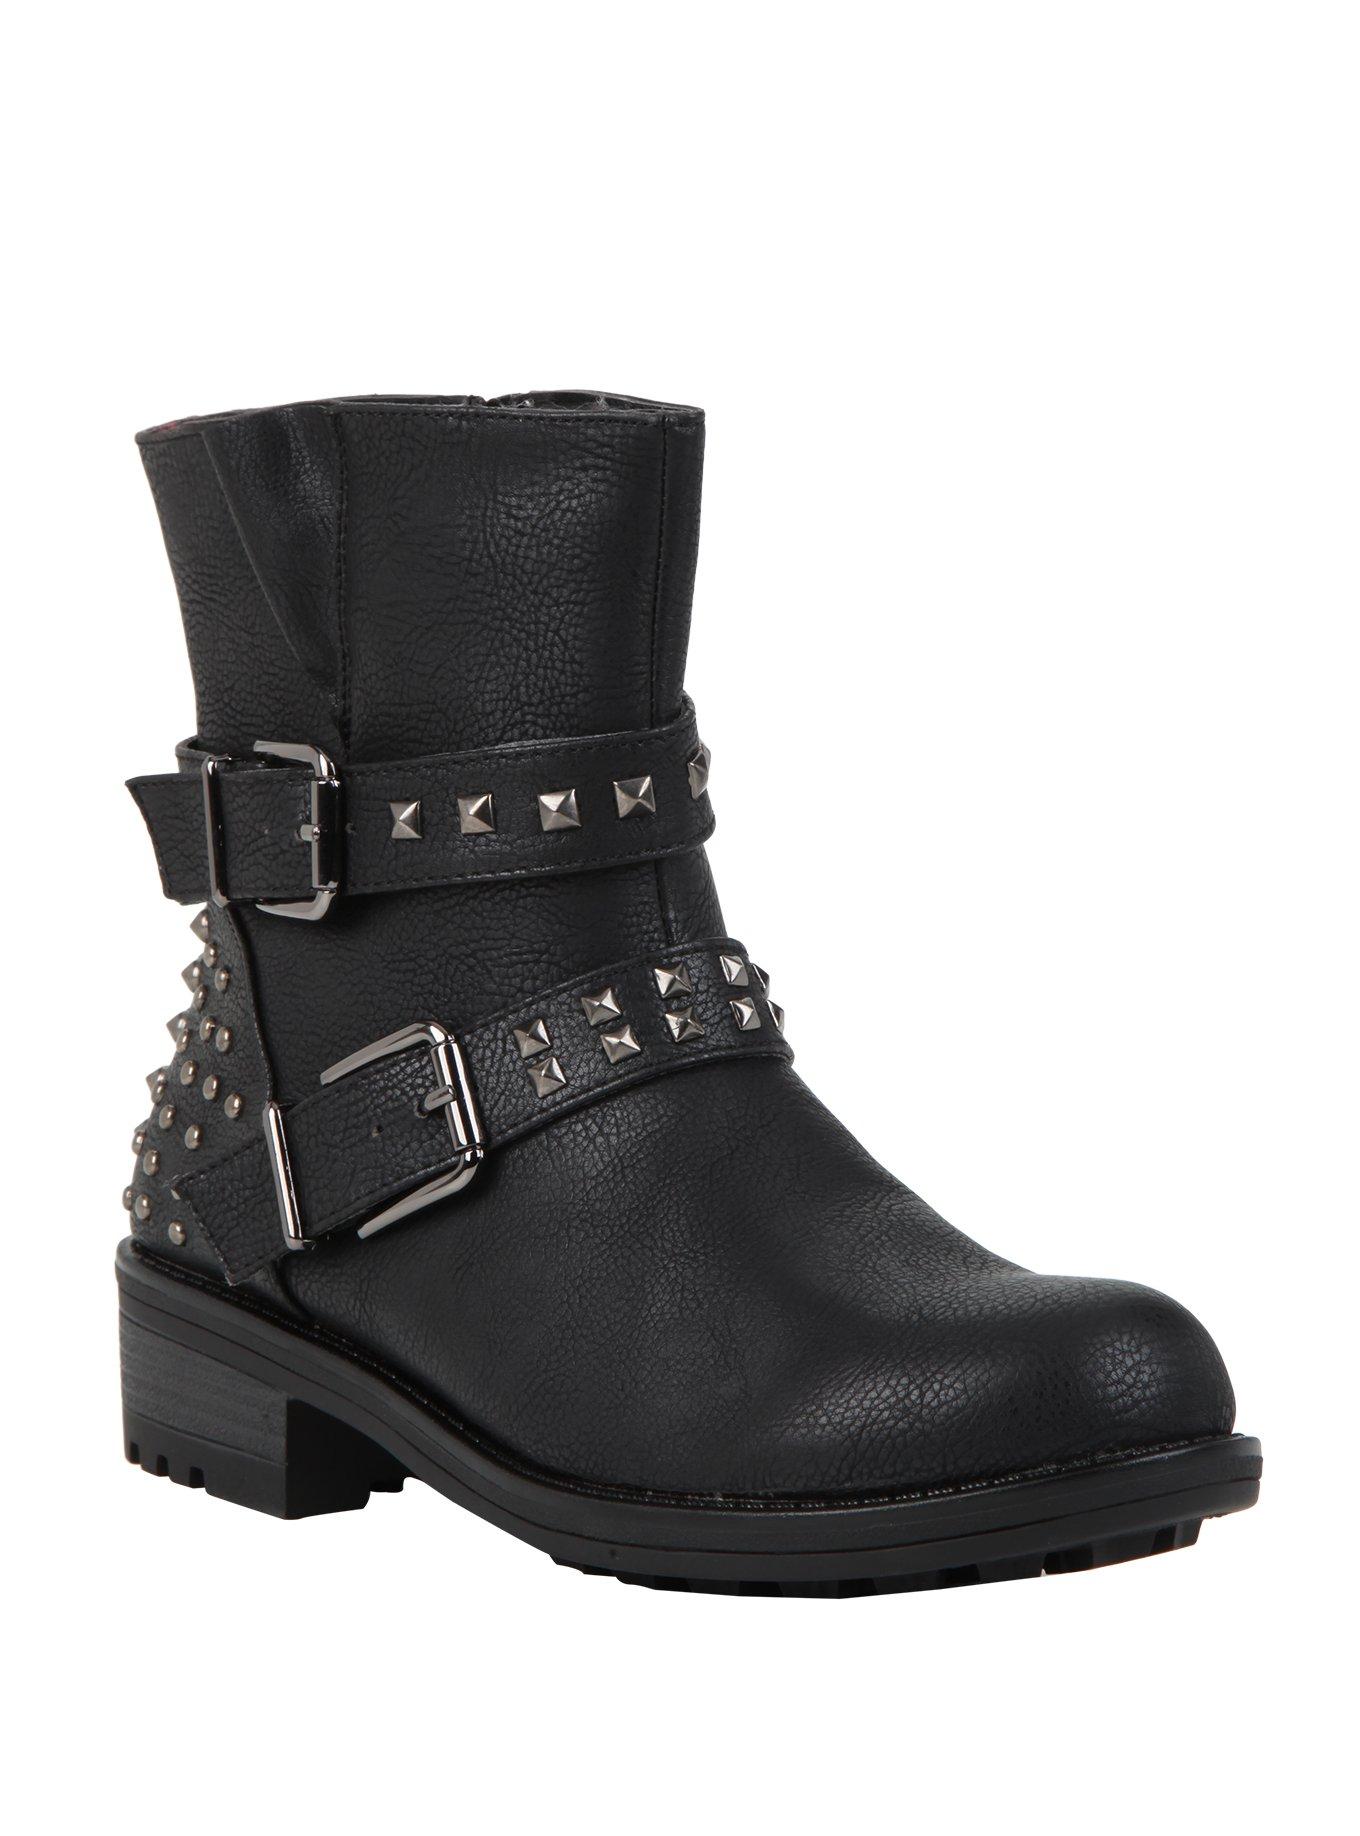 Black Buckle Stud Ankle Boots | Hot Topic